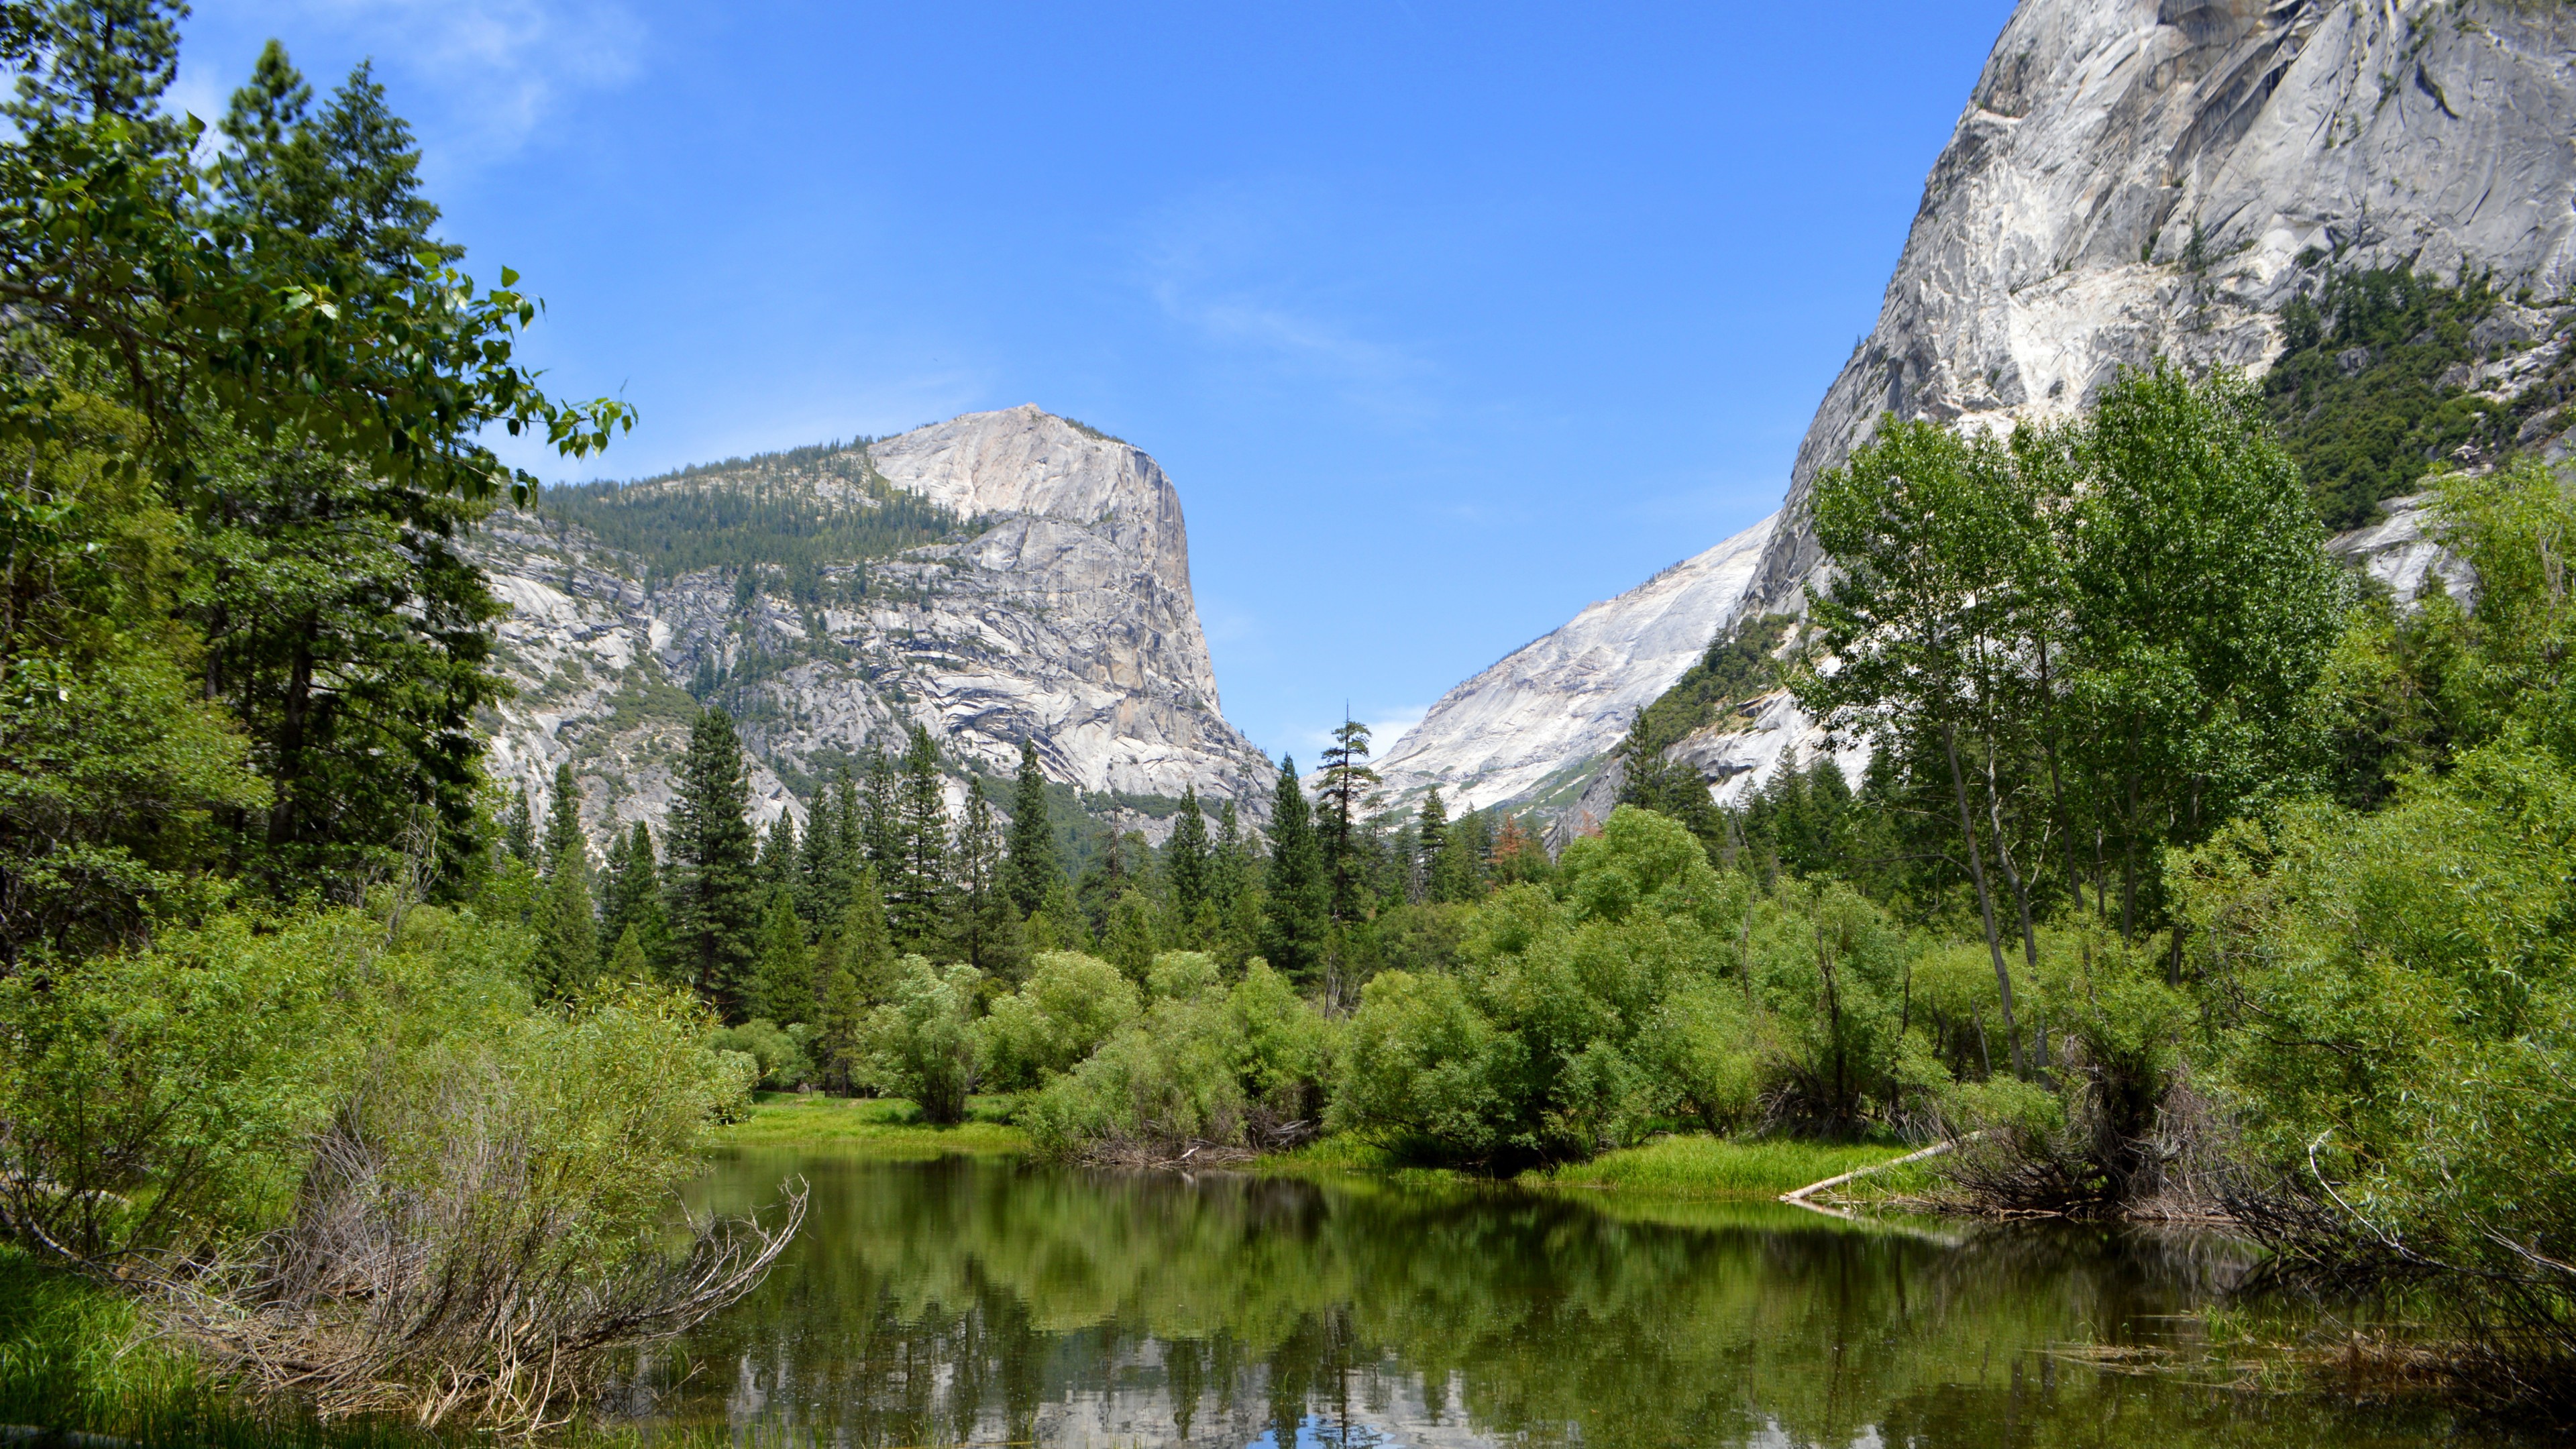 General 3840x2160 Yosemite National Park Half Dome lake mountains cliff forest USA water outdoors nature